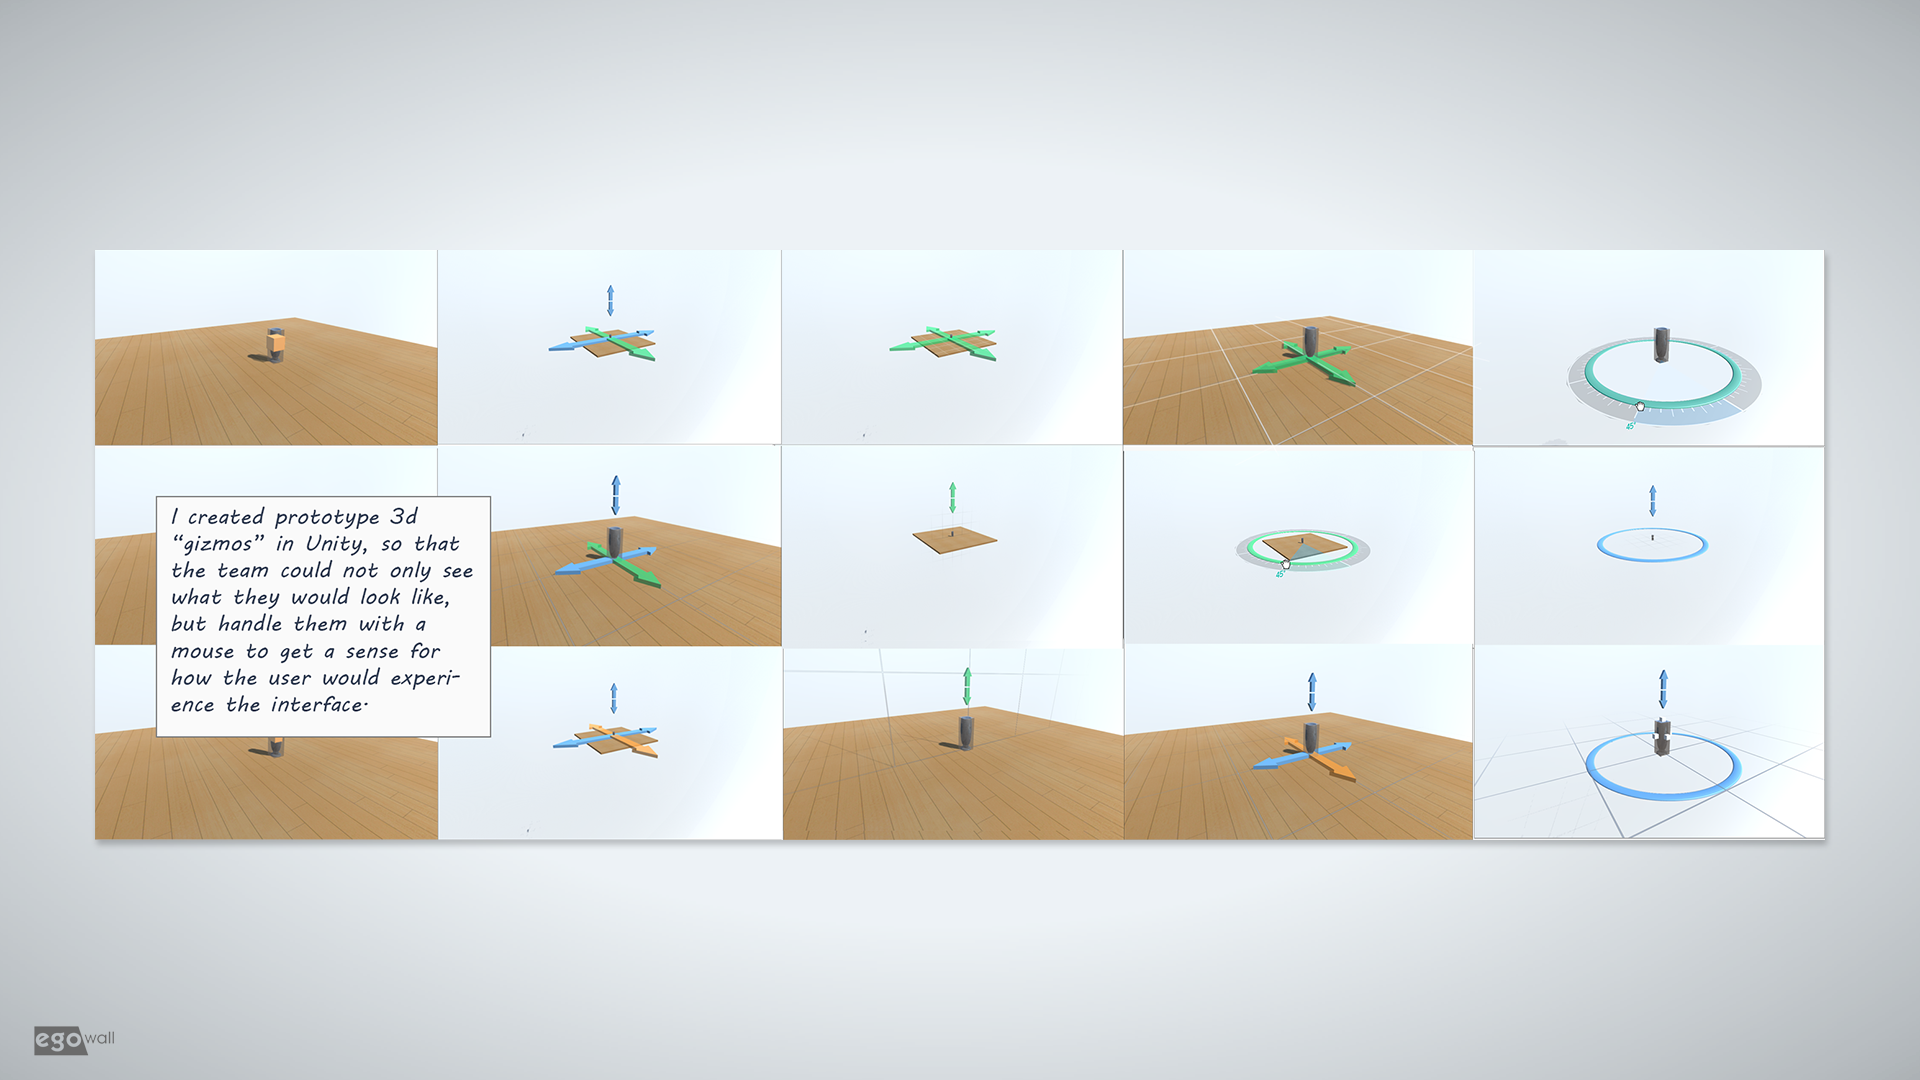 Prototype 3d object manipulation interfaces.